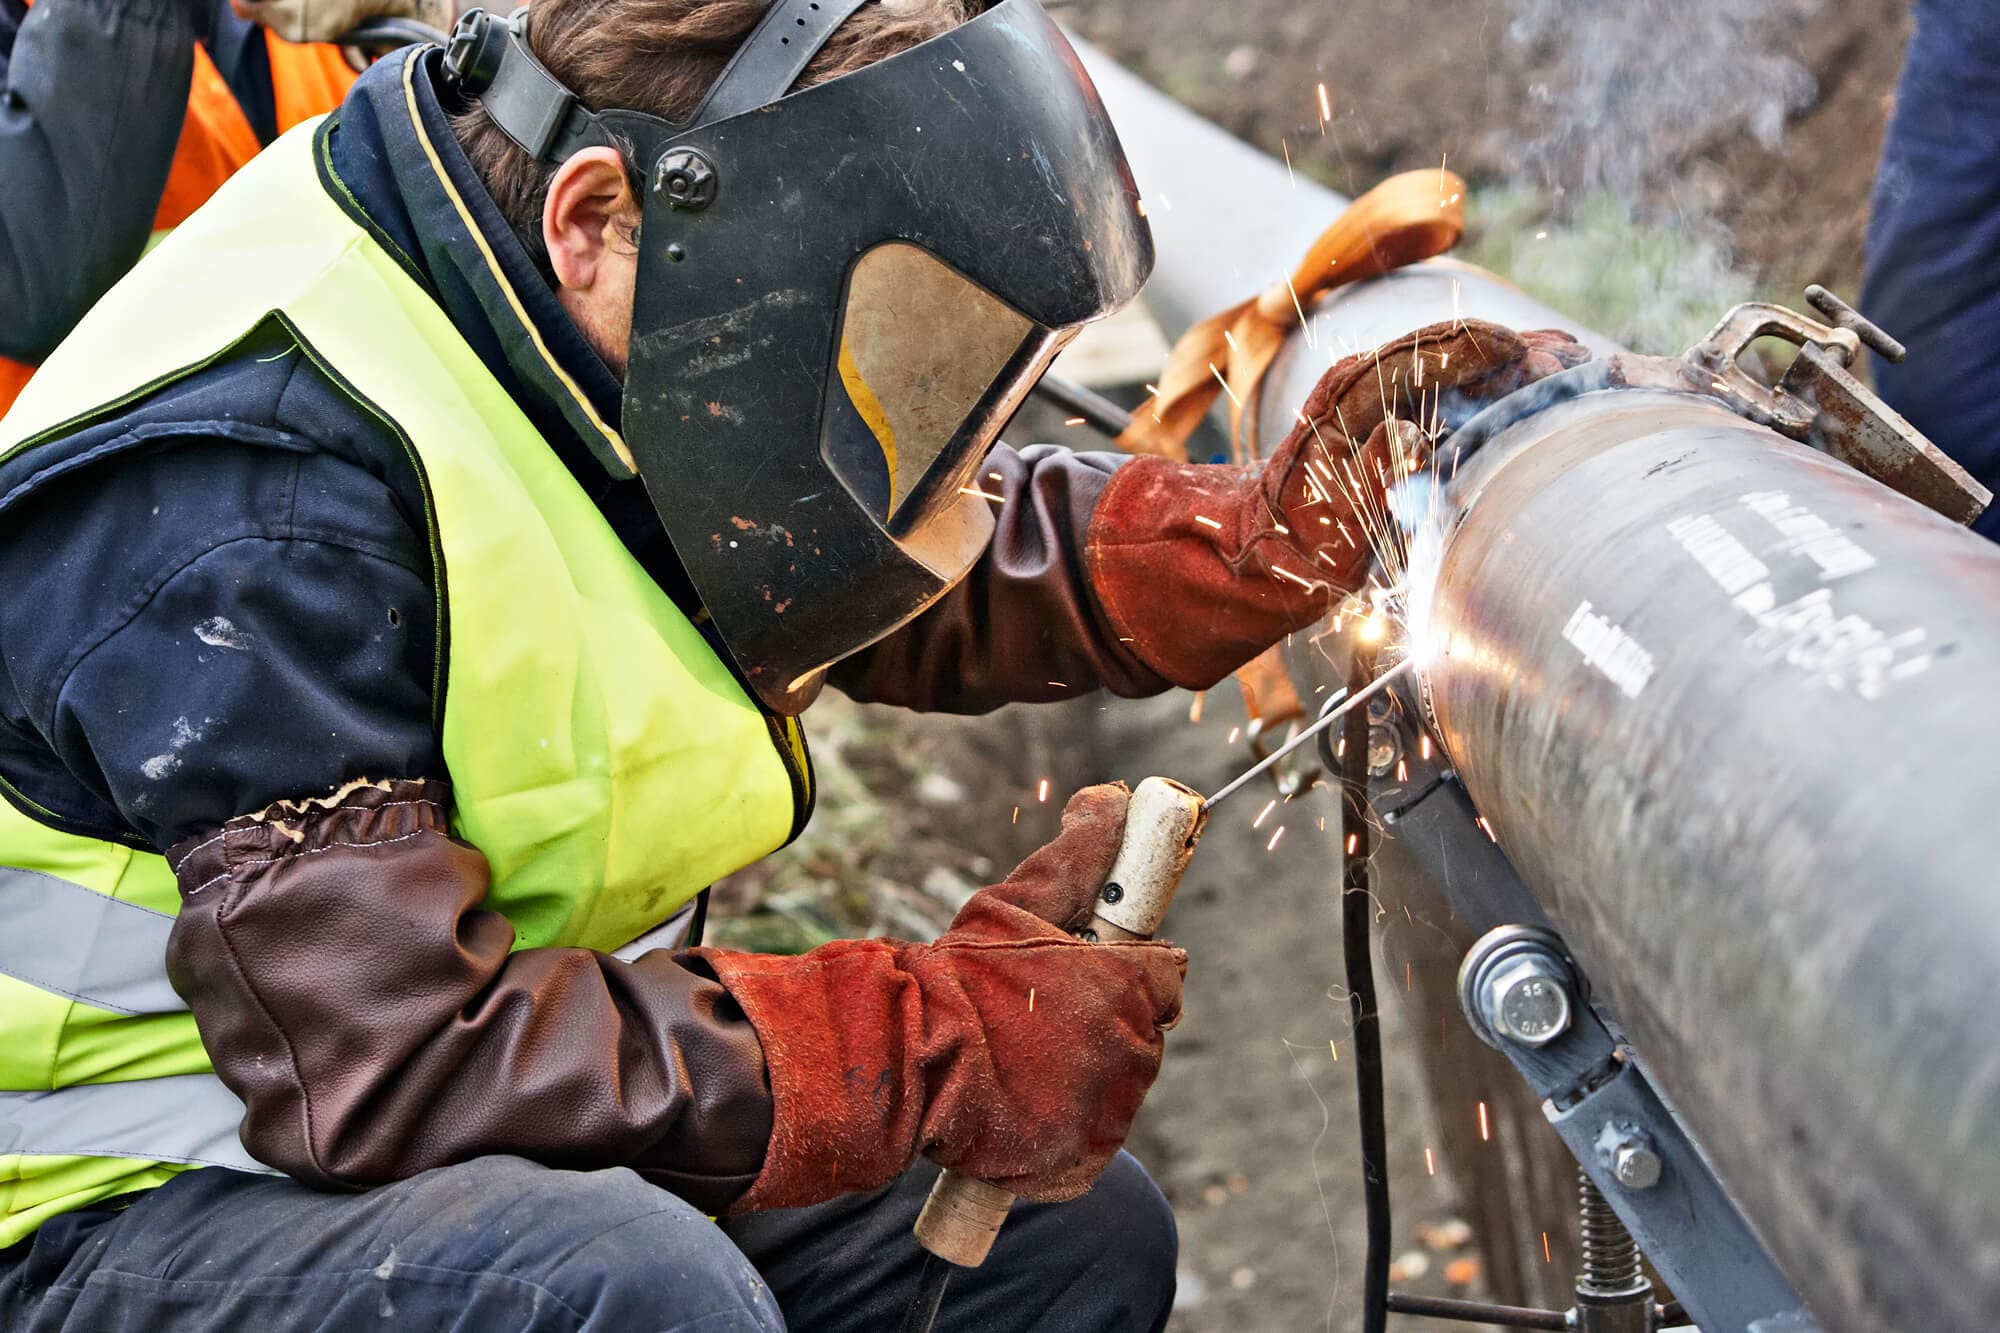 Best Welding Gloves: Keep Your Hands Safe From the Heat